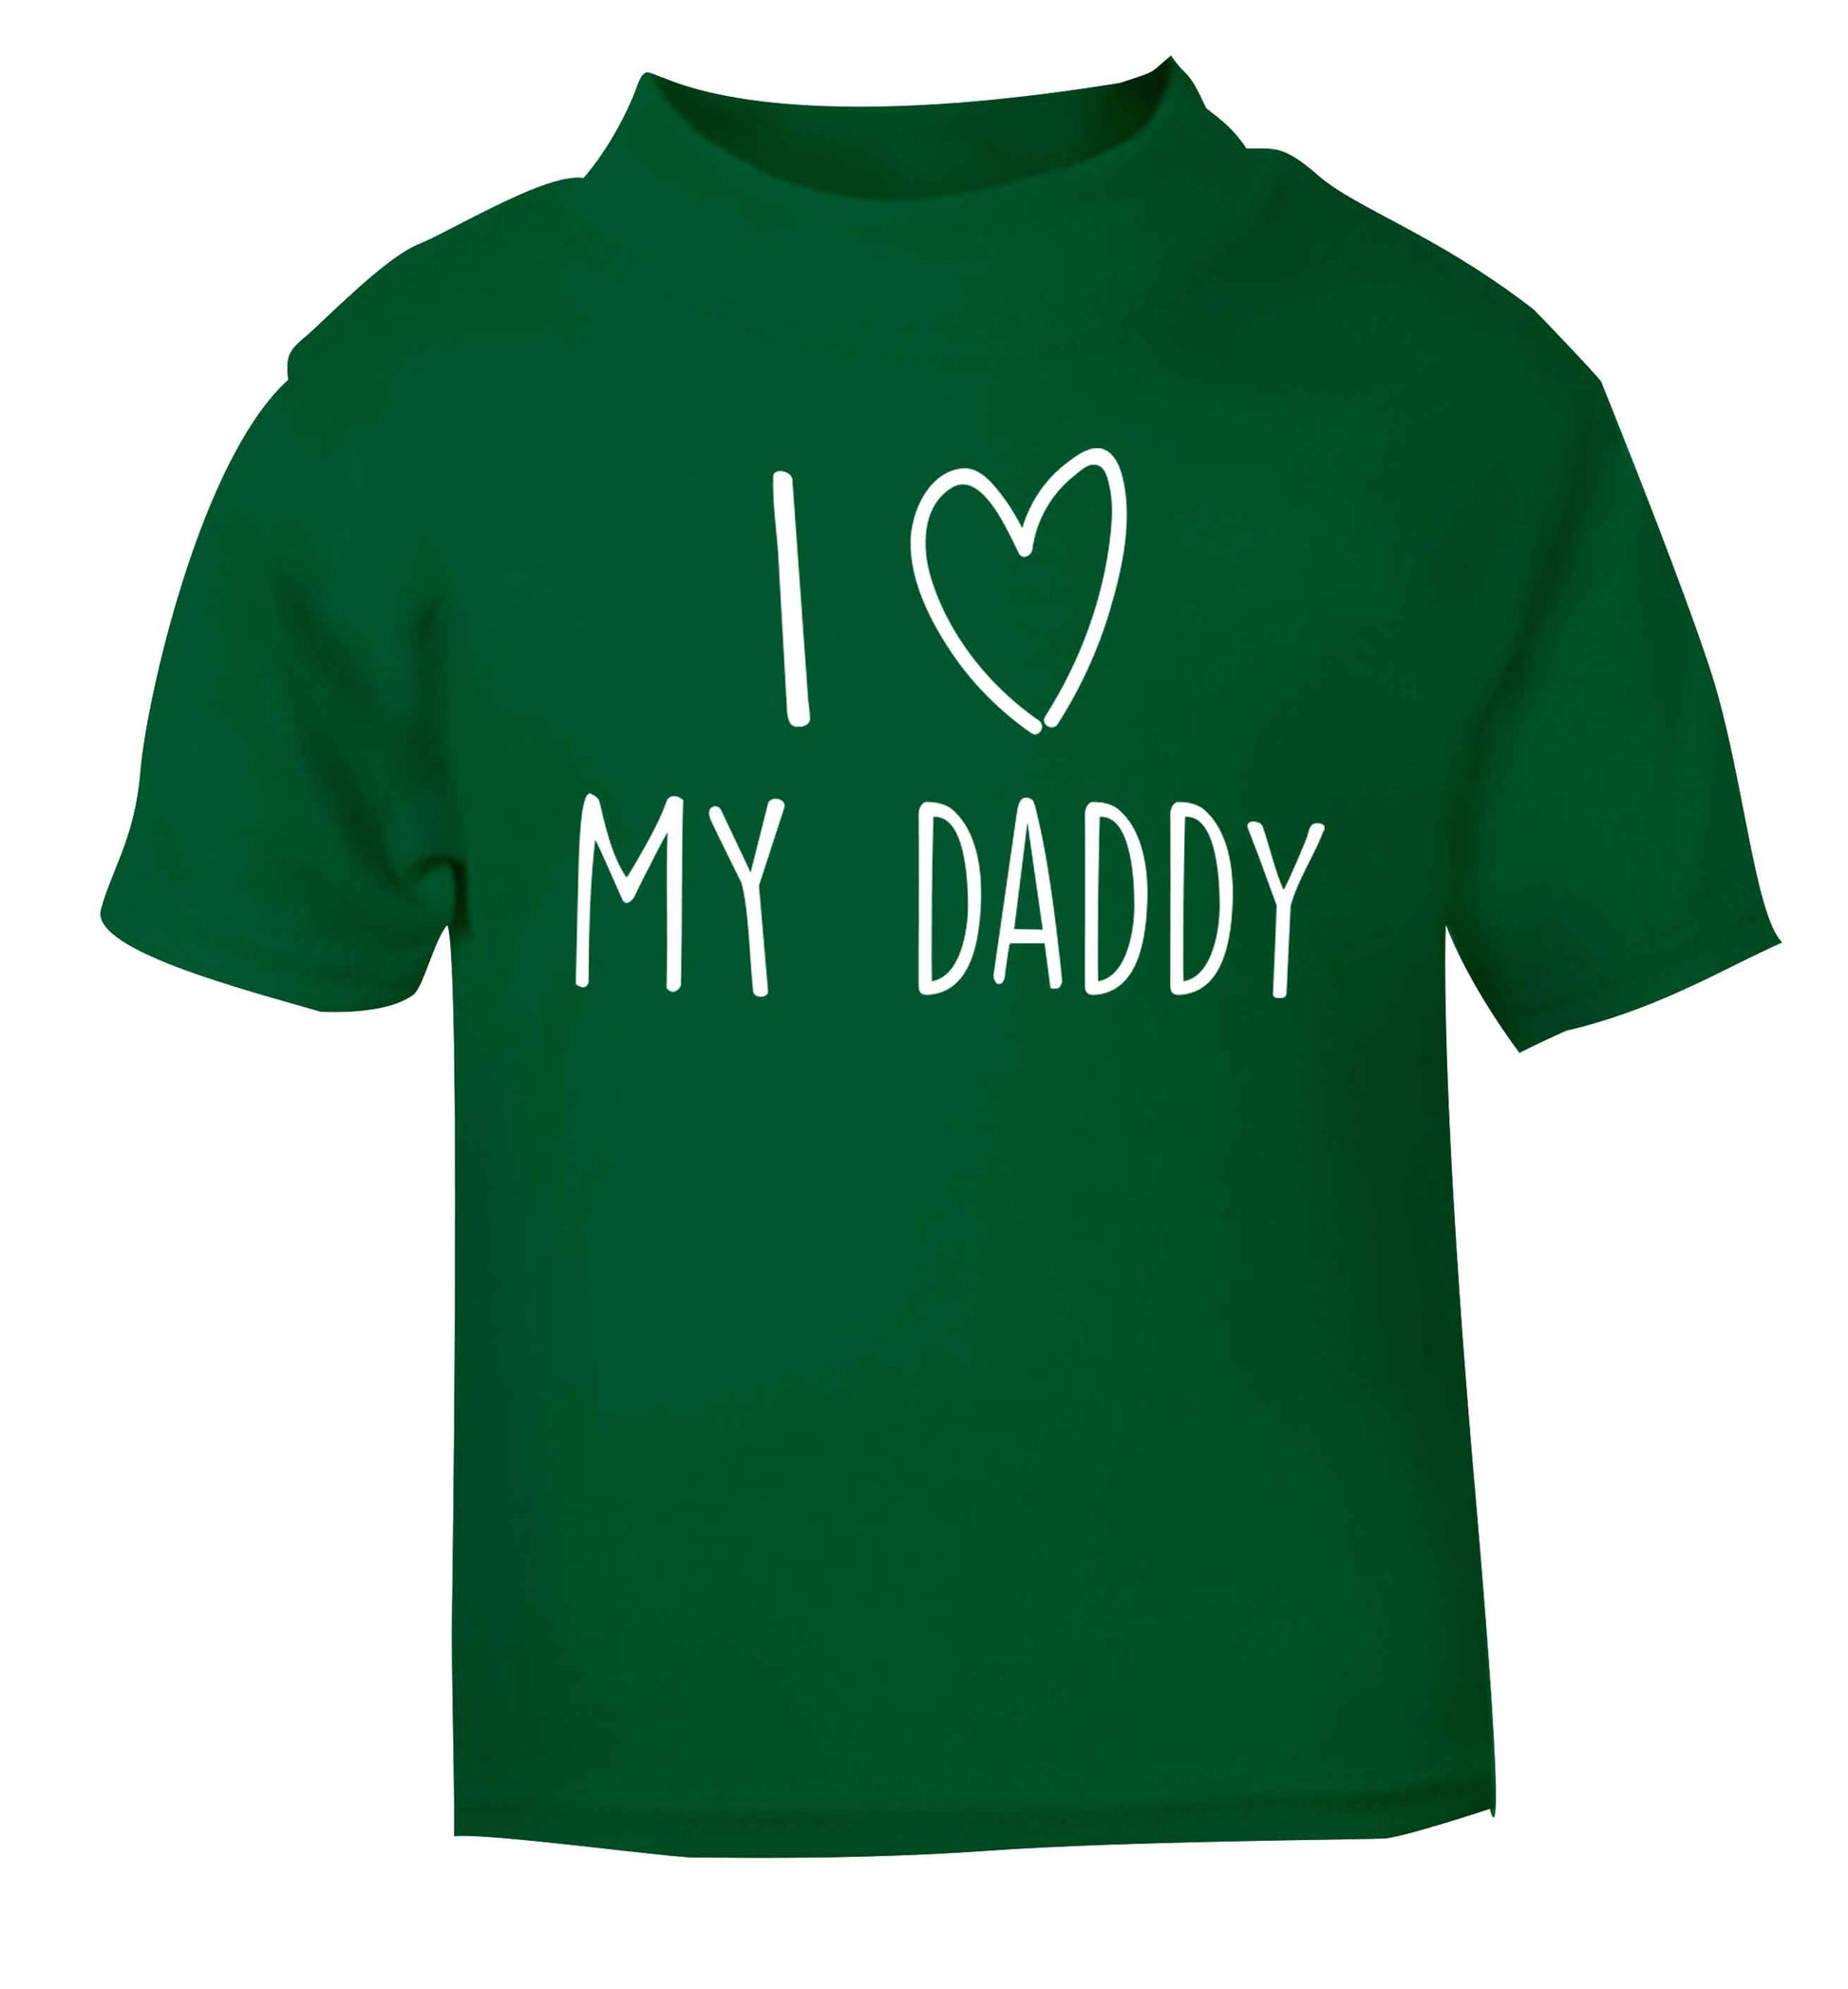 I love my daddy green baby toddler Tshirt 2 Years